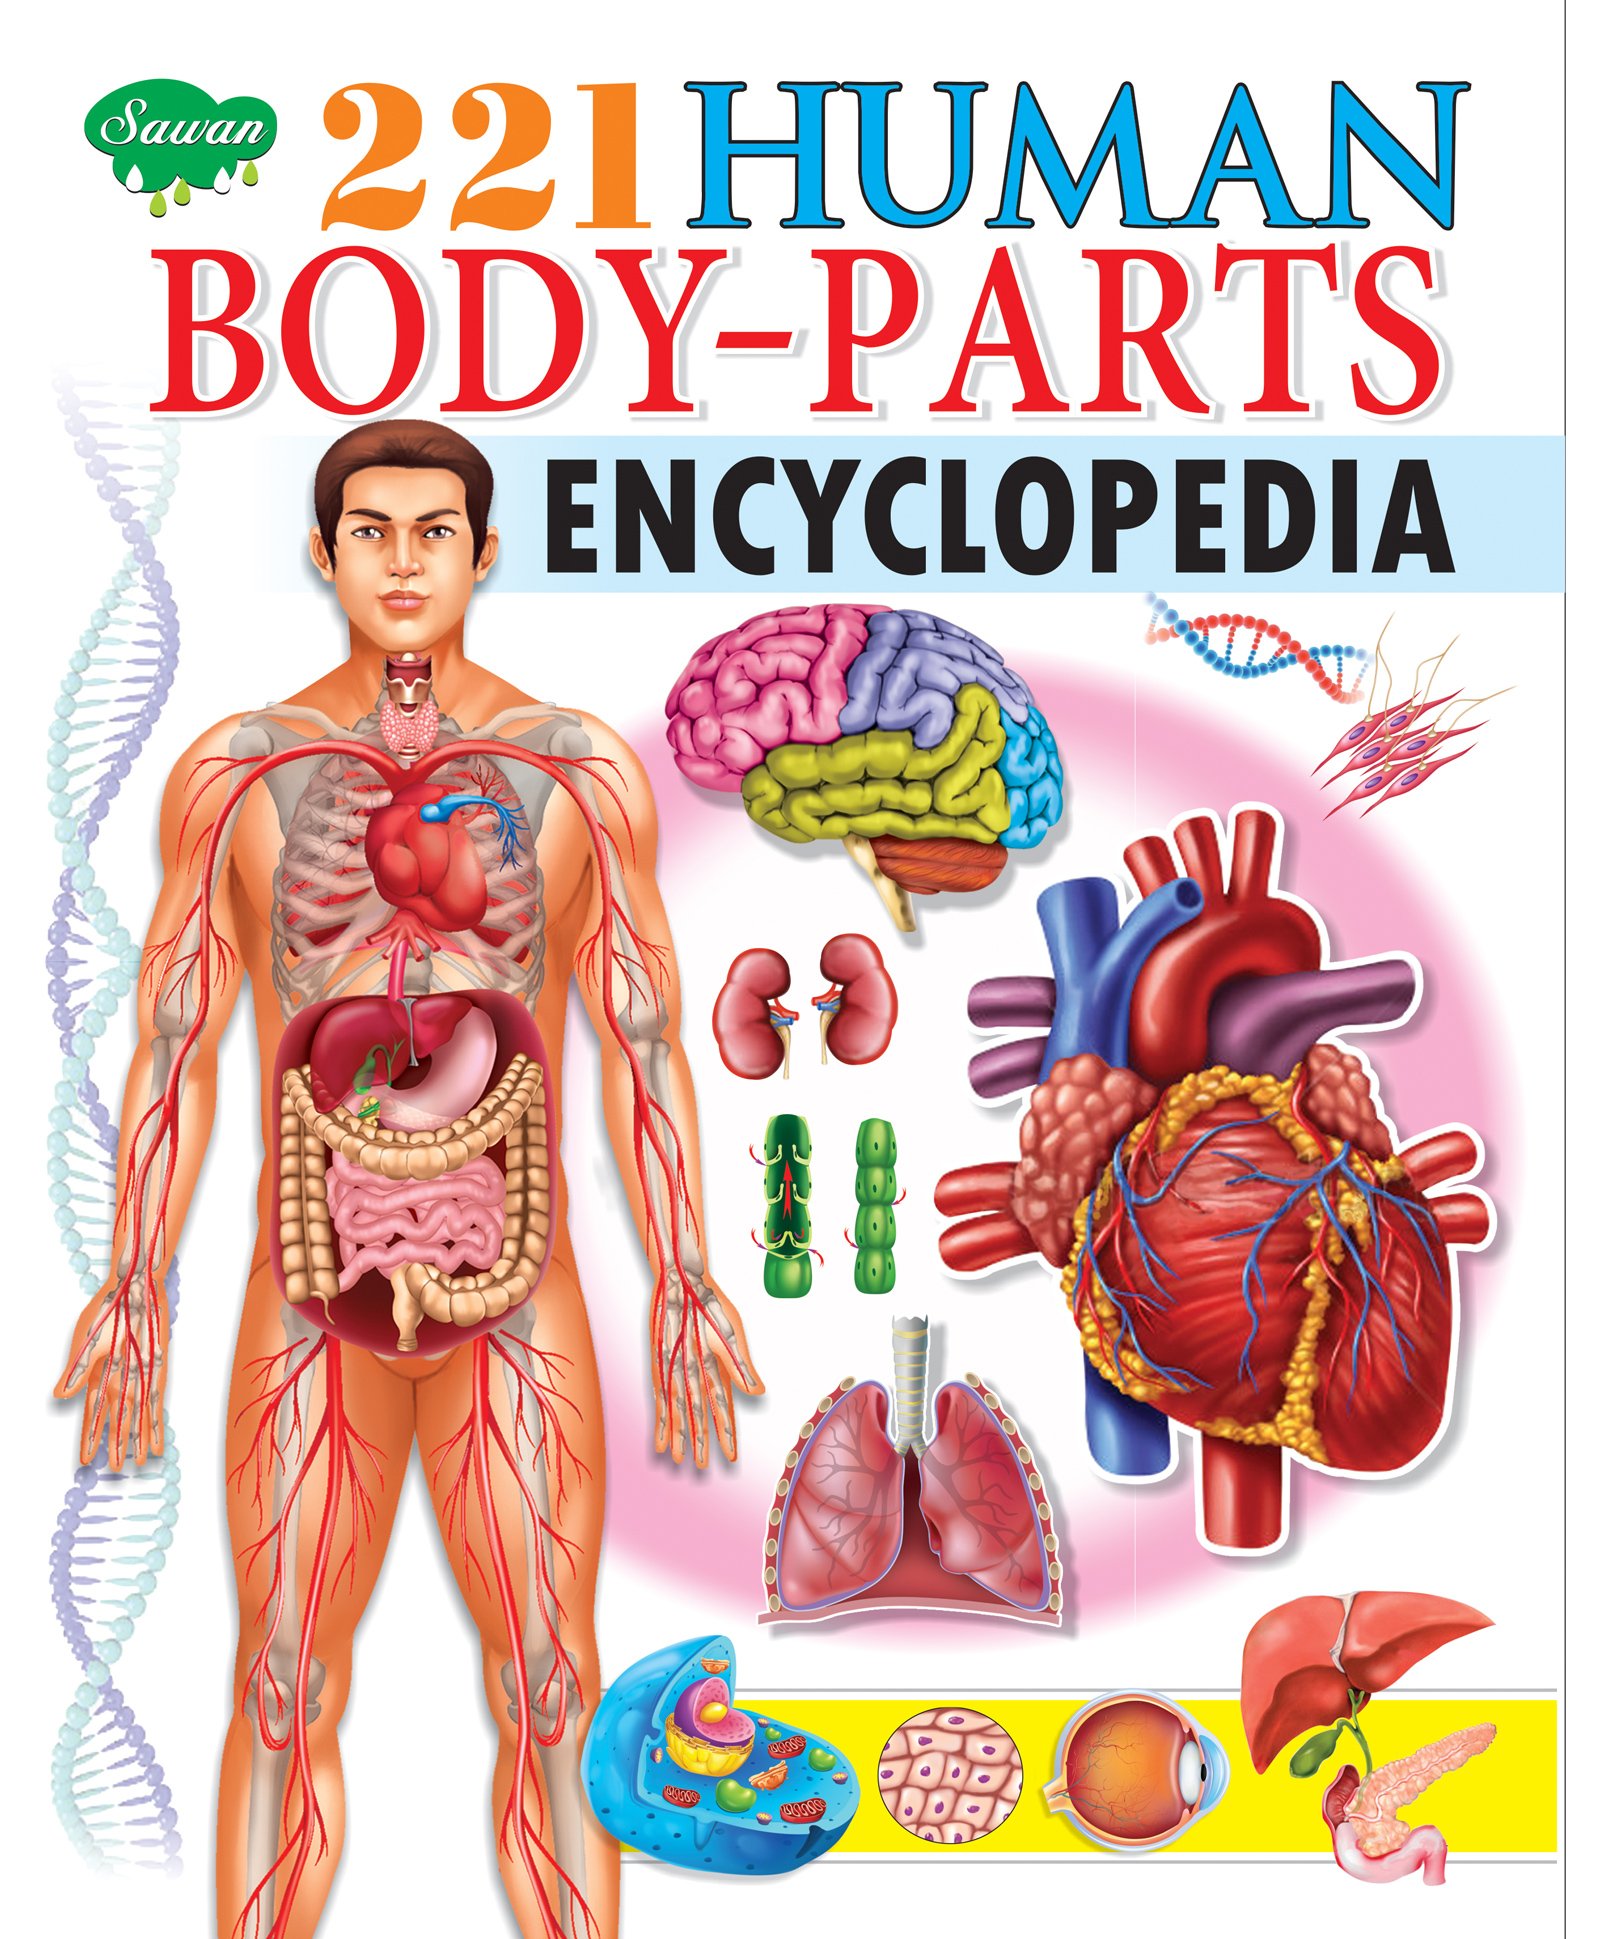 Body Parts With Pictures : Body Parts : Male and female body with